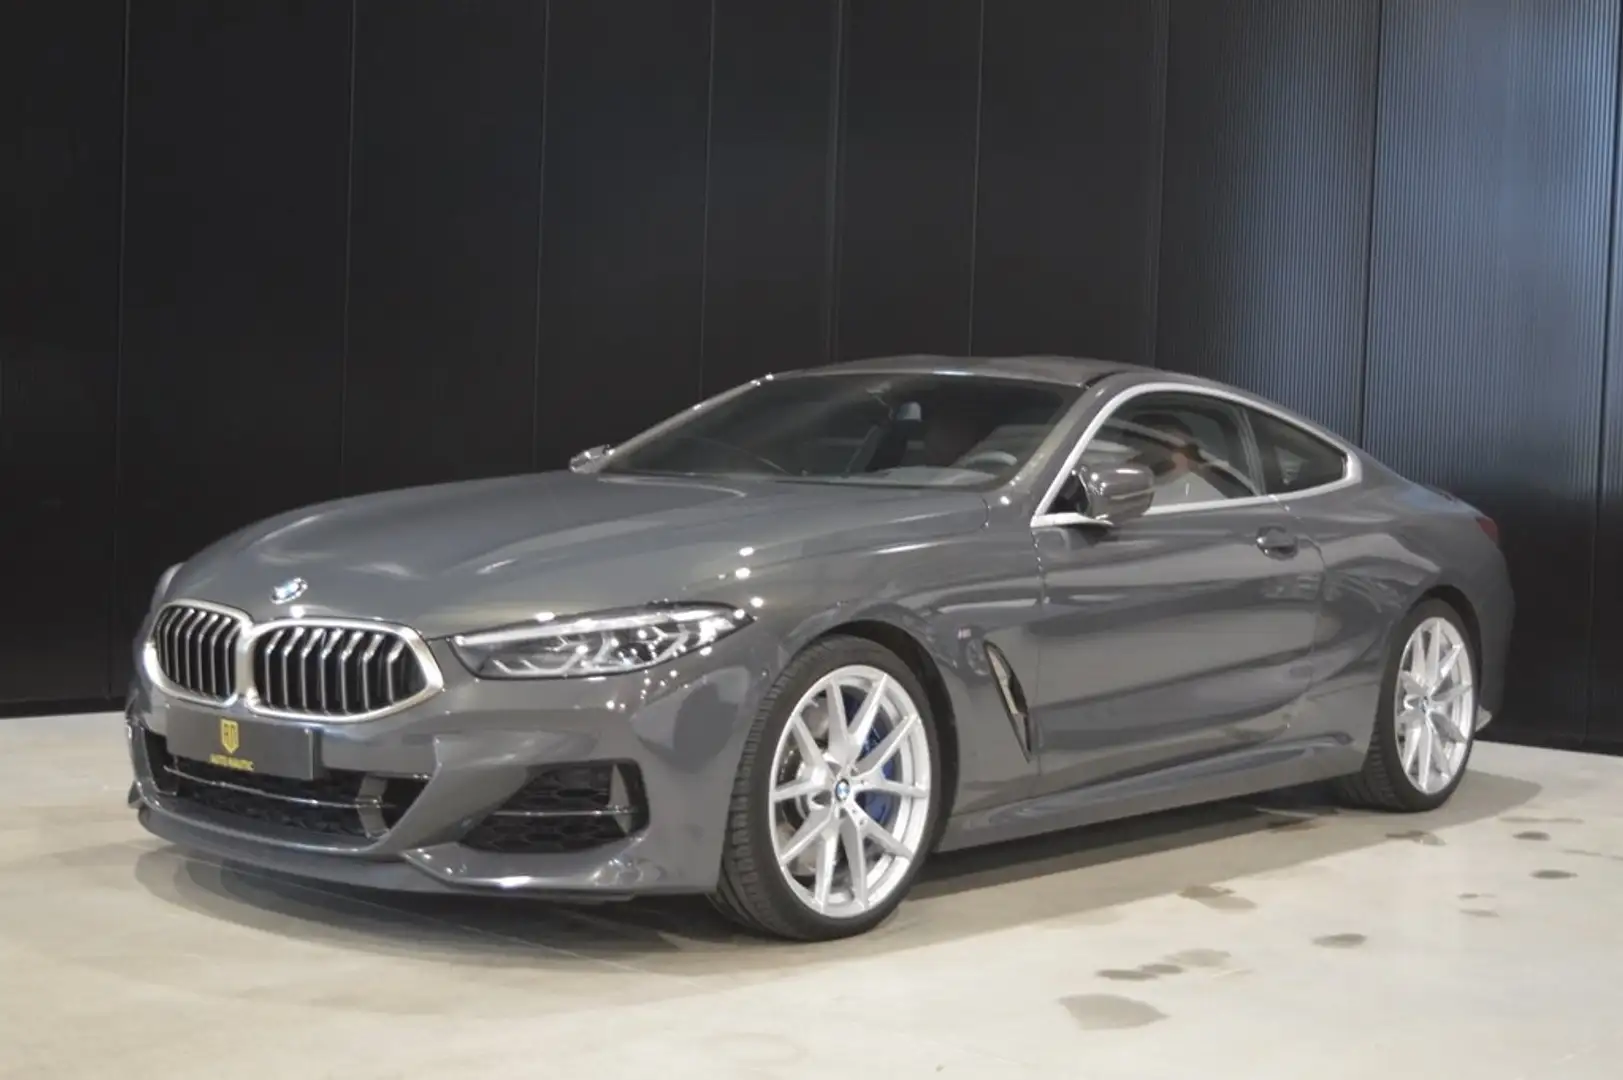 BMW 850 i xdrive 64.000 km ! Carbon pack ! Top condition ! Gri - 1